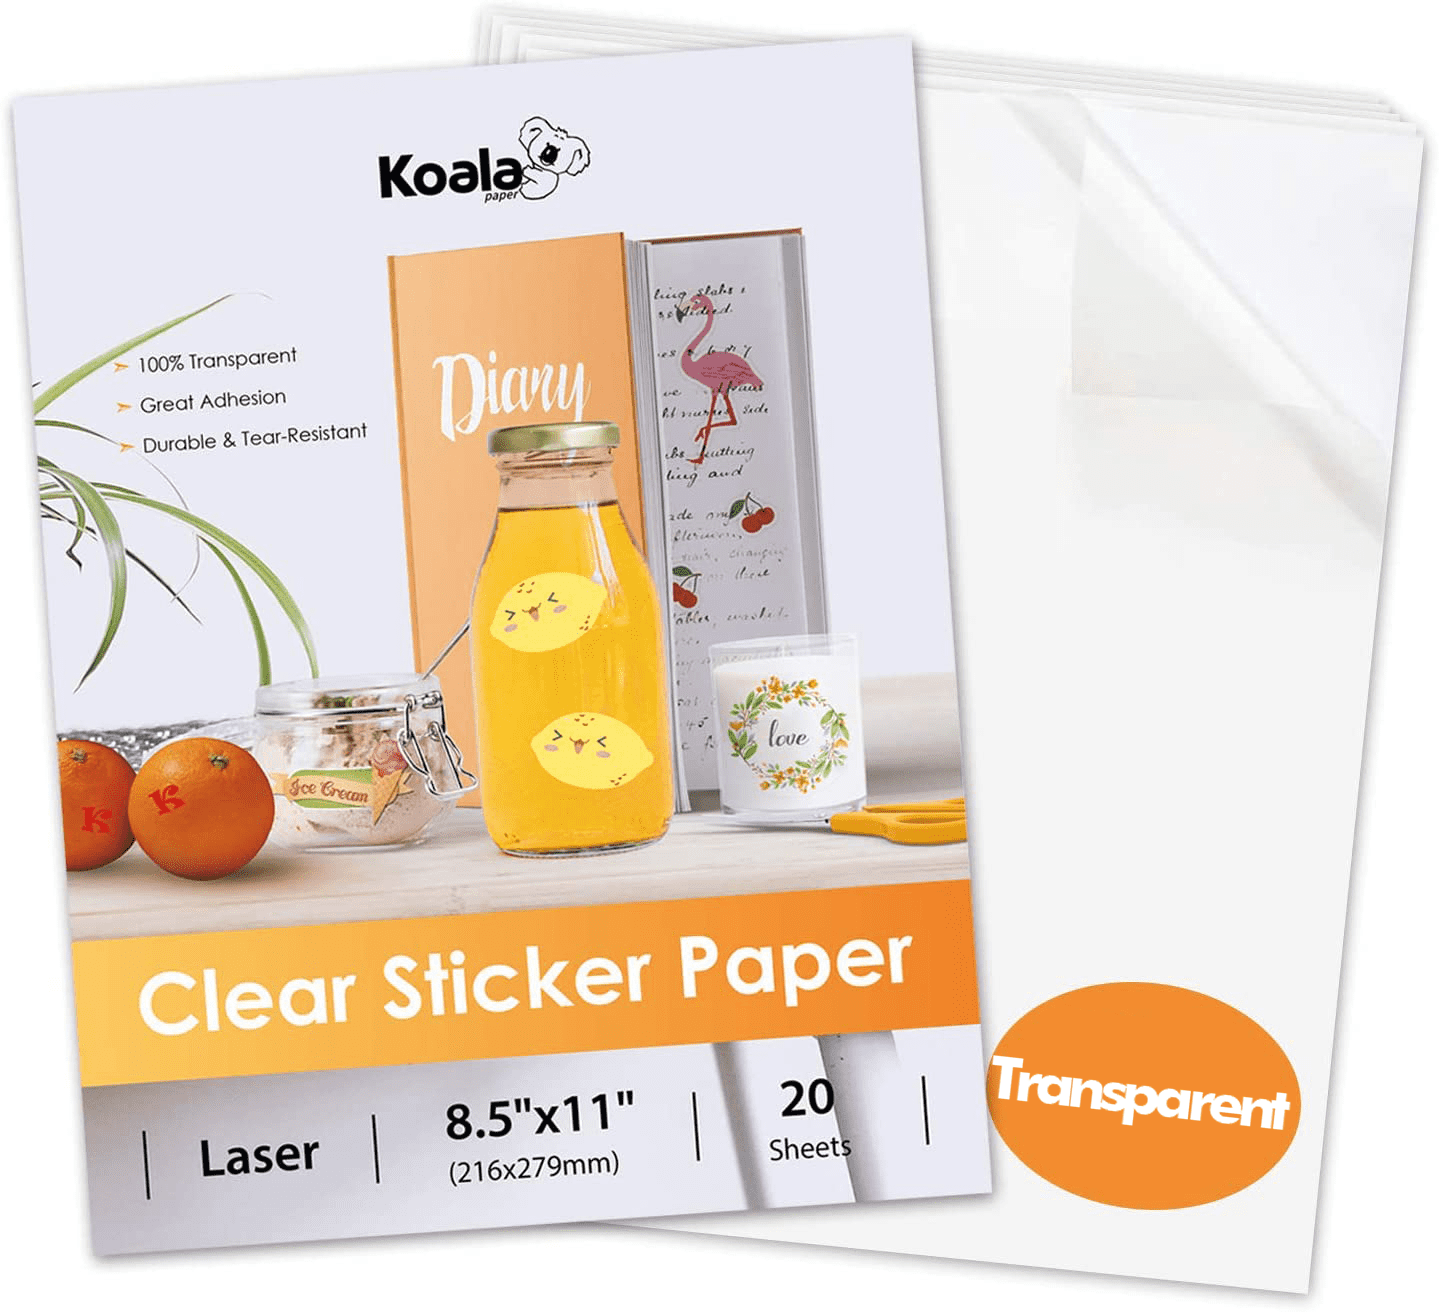 PAPERVISUAL Printable Permanent Vinyl Paper - 20 Sticker Sheets For Printer  - Matte White Waterproof Sticker Paper - Thick Tear-Resistant Sticker